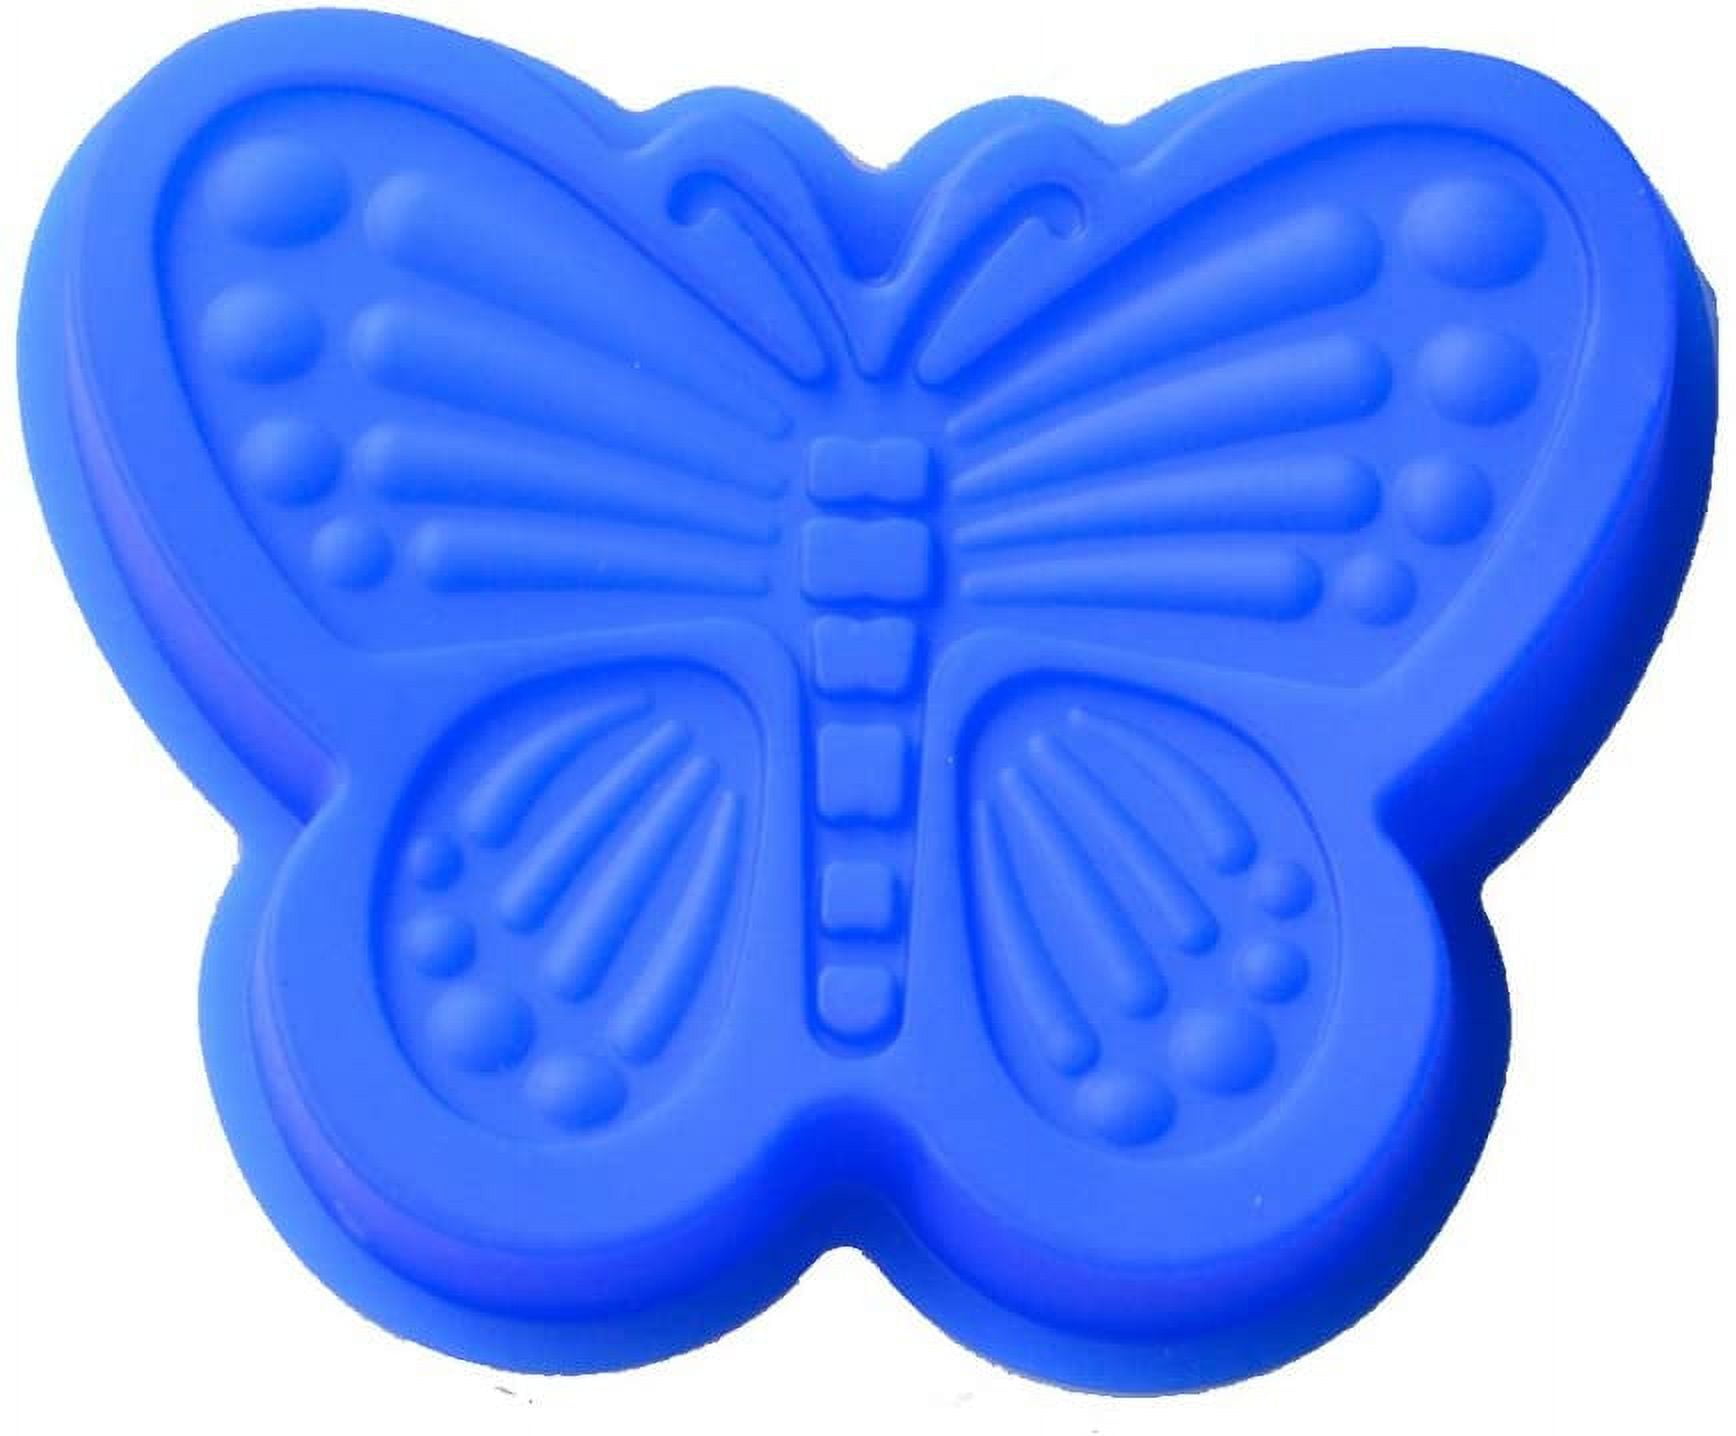  3 Pcs Butterfly Shape Silicone Mold,Non-Stick Chocolate Soap  Pudding Jello Tray Butterfly Candy Mold-Pink,Blue,Purple : Home & Kitchen